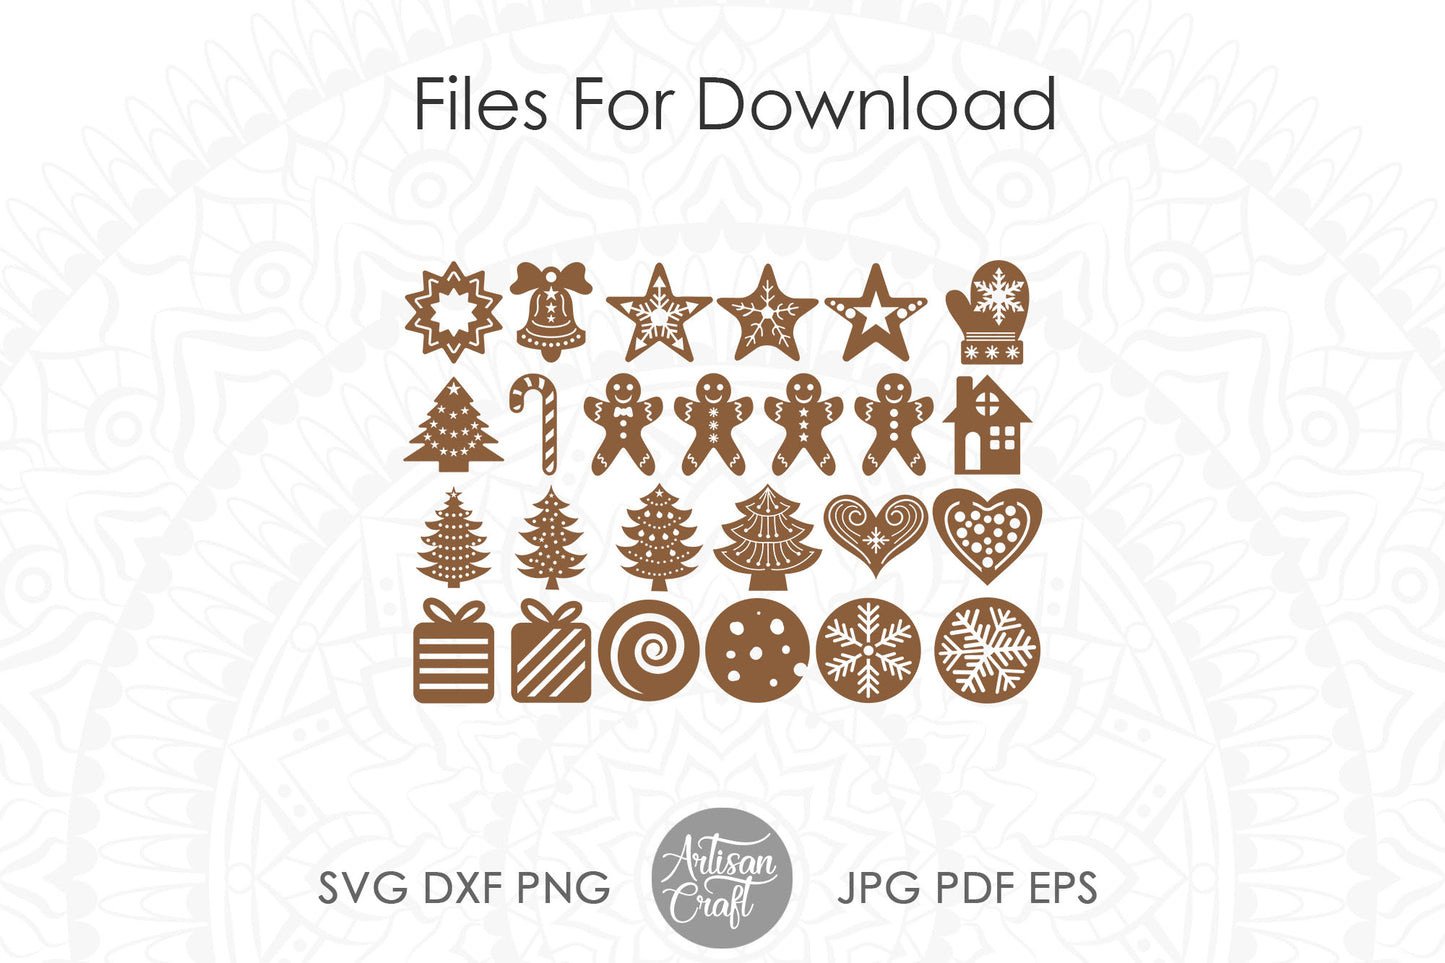 Christmas cookie SVG and clipart